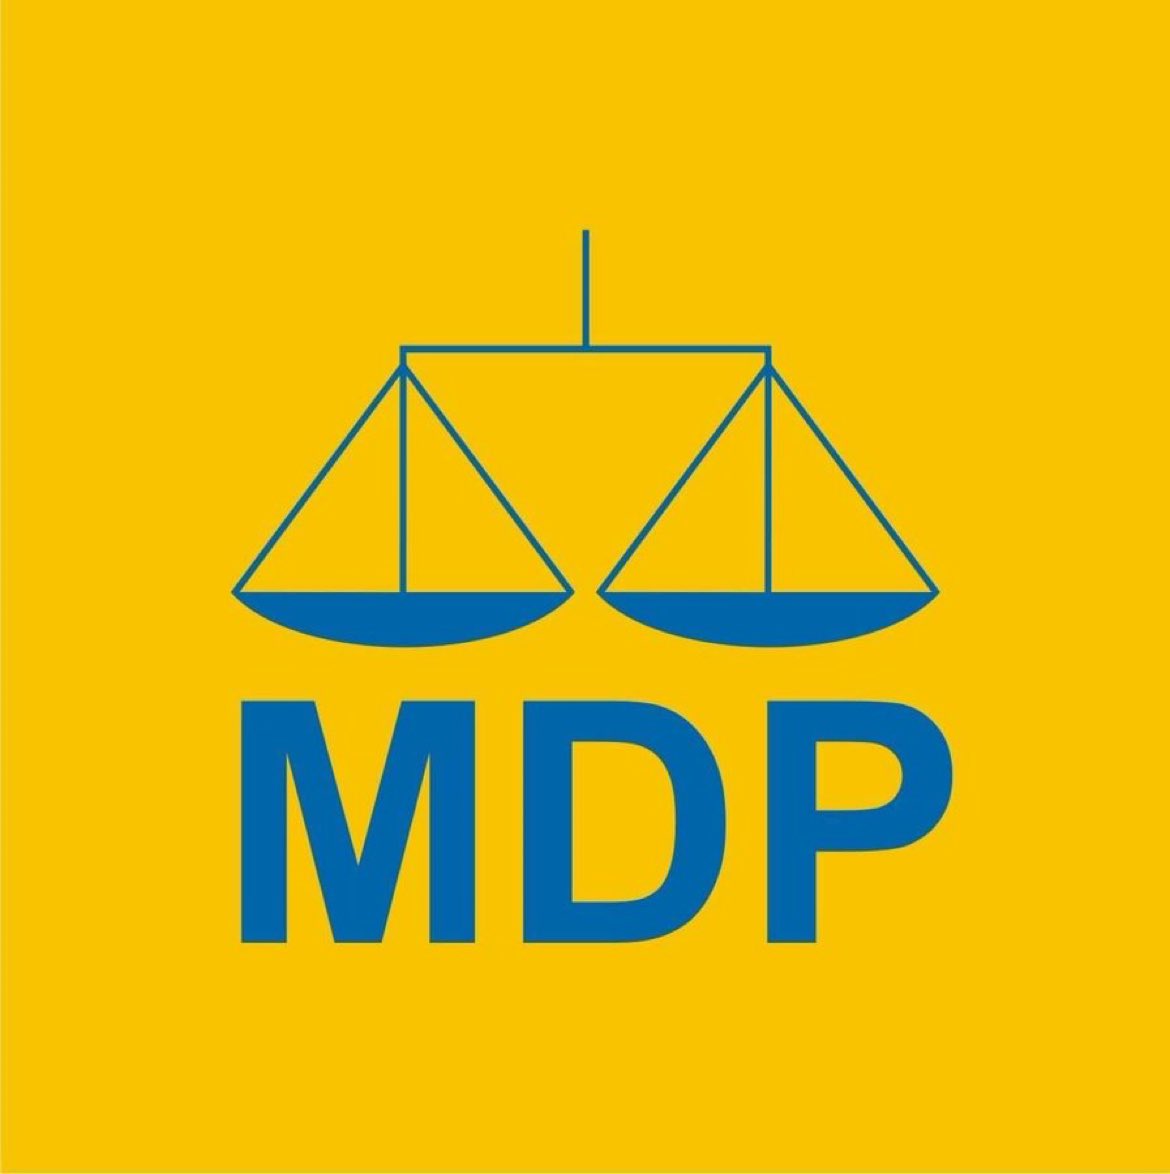 MDP's journey remains unwavering, guided by hope and resilience. The wave of the MDP flag signifies enduring commitment. Our colors won't fade, our ideals won't vanish. Together, we forge ahead, resolute in our dedication to progress and change. #MDP
 
KKBK💛⚖️
#MDPKuriah